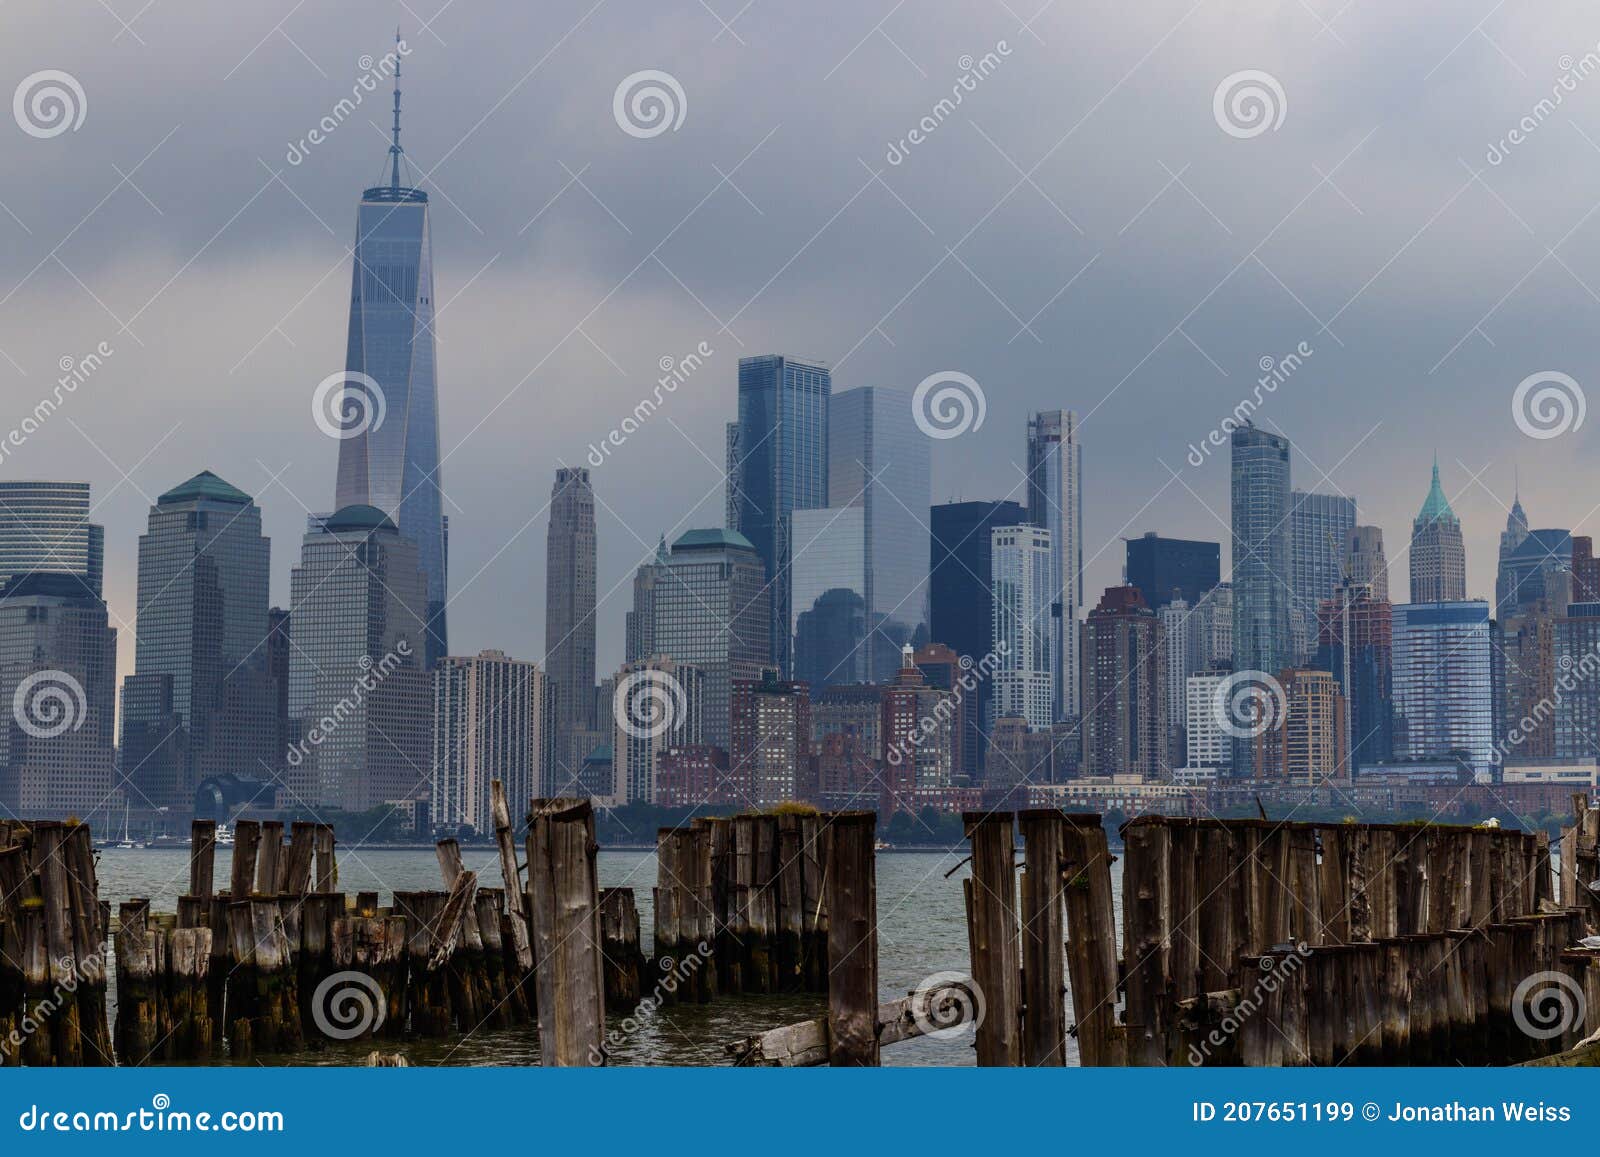 manhattan skyline including one world trade center, also known as the freedom tower. more than 800 languages are spoken in nyc